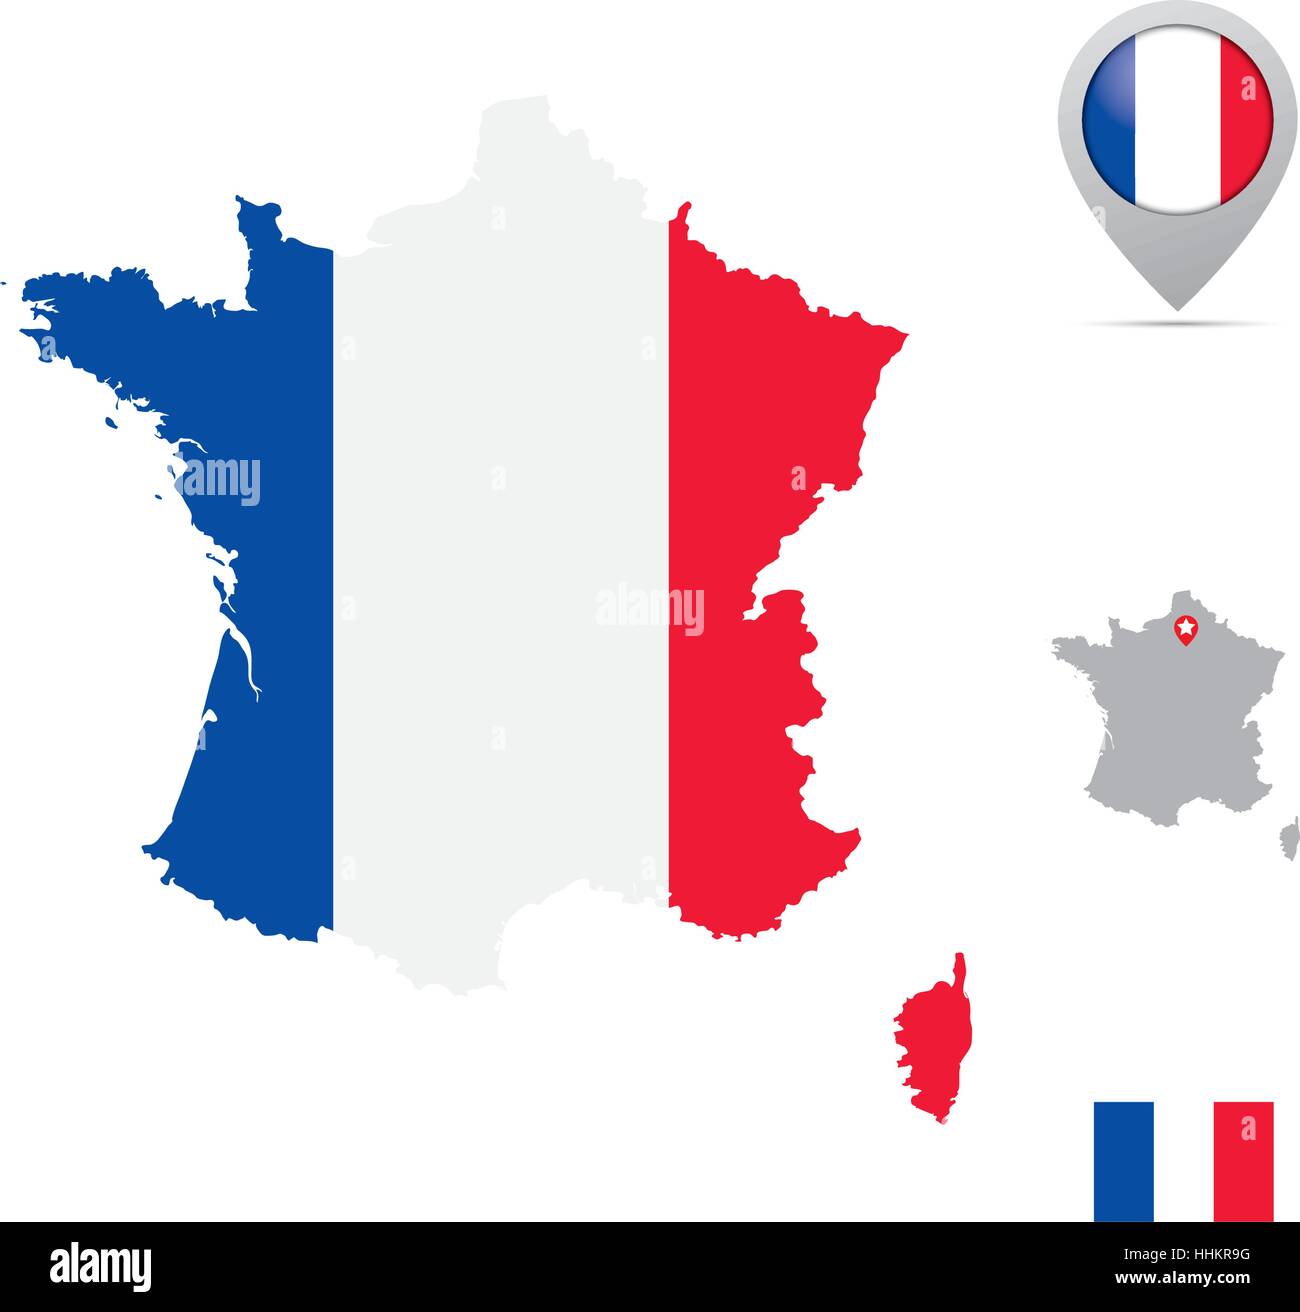 France map in national flag colors, flag, marker and location of its capital paris. Stock Vector